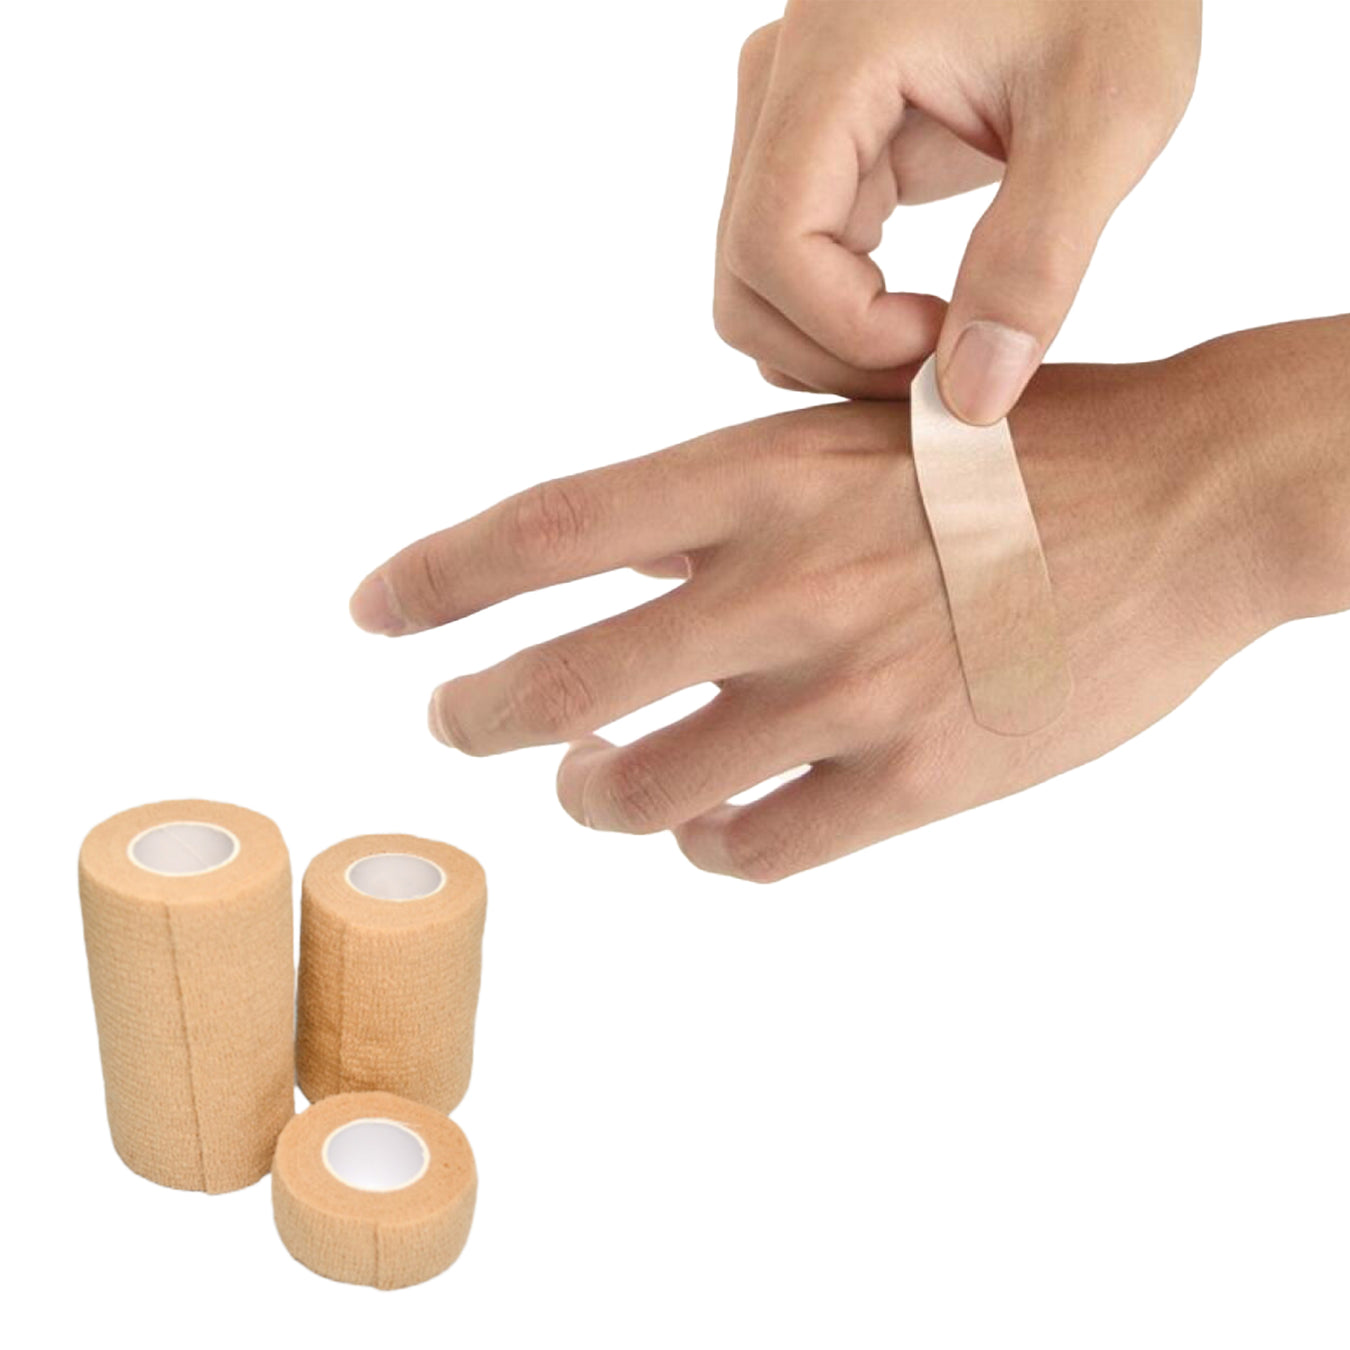 Bandages & First Aid